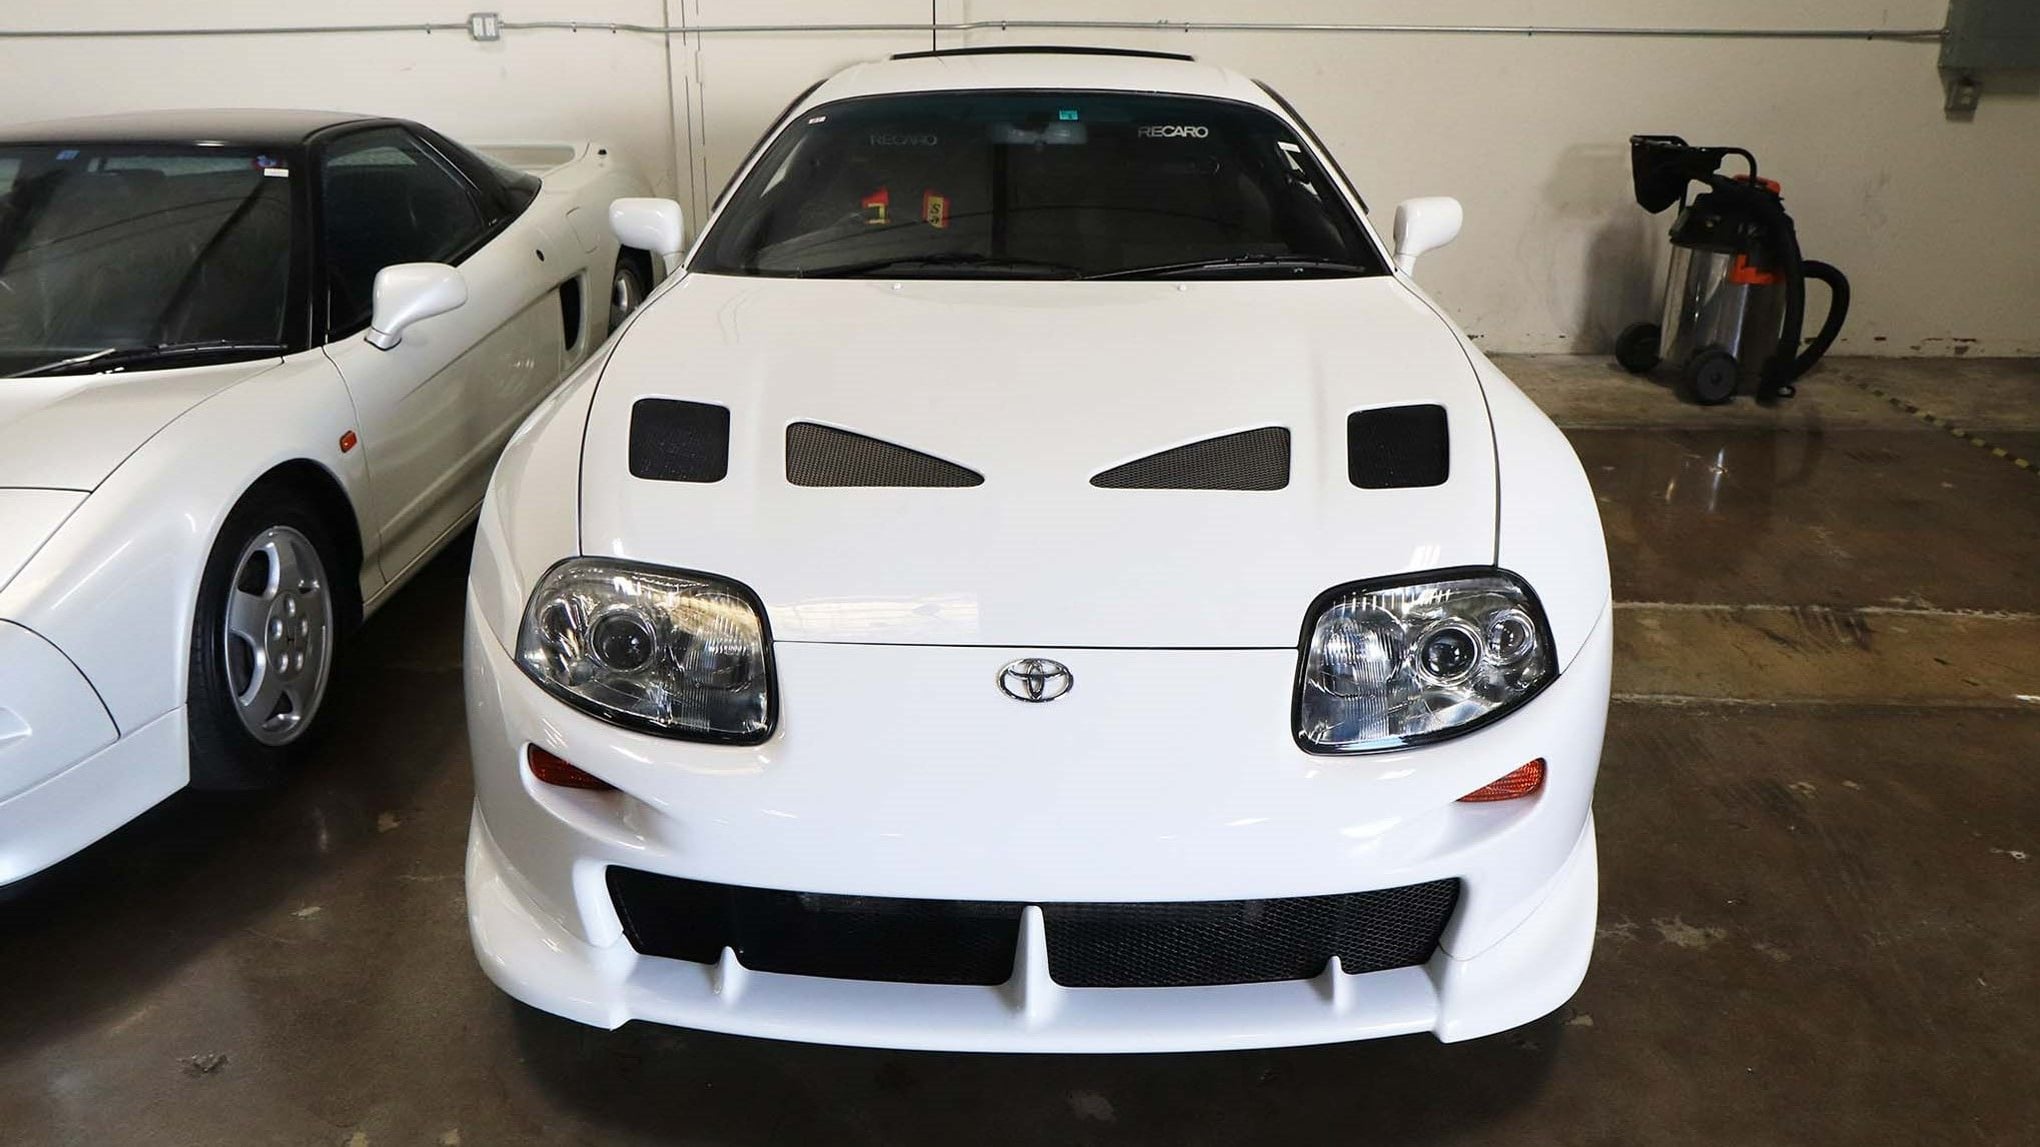 Running One of the Largest JDM Vehicle Importers | Clublexus